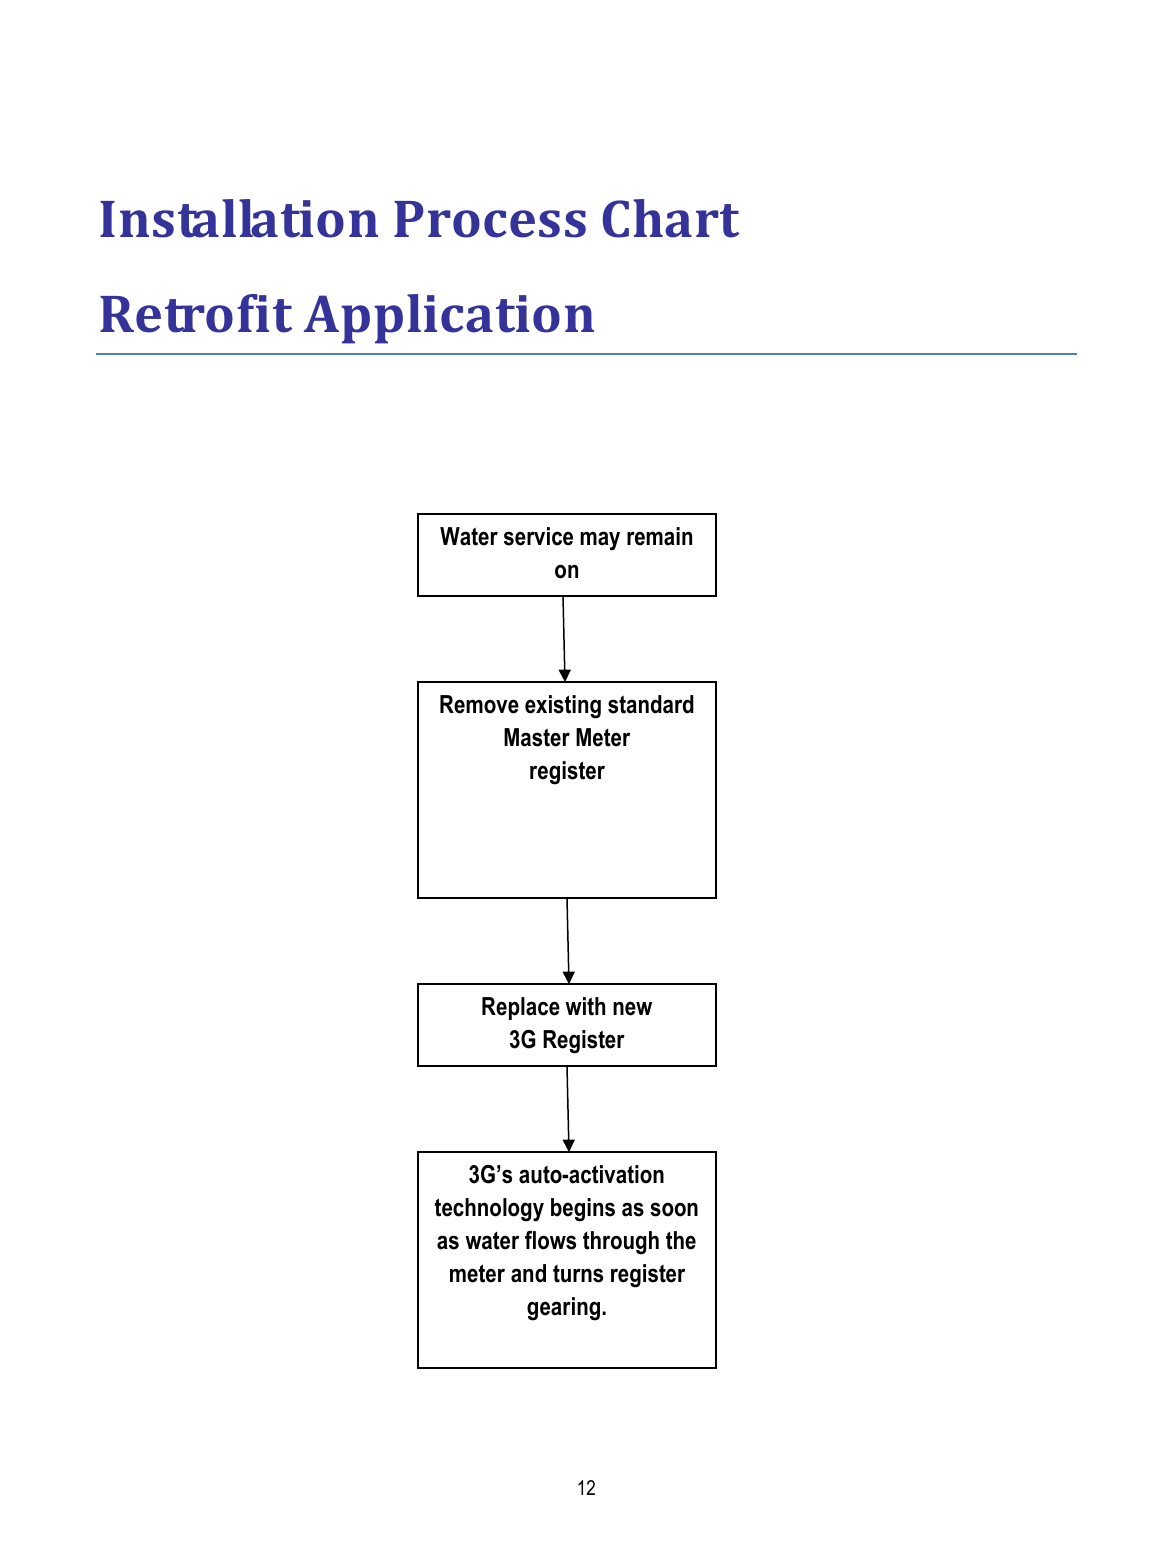  12   Installation Process Chart Retrofit Application Water service may remain on Remove existing standard Master Meter register Replace with new 3G Register 3G’s auto-activation technology begins as soon as water flows through the meter and turns register gearing. 